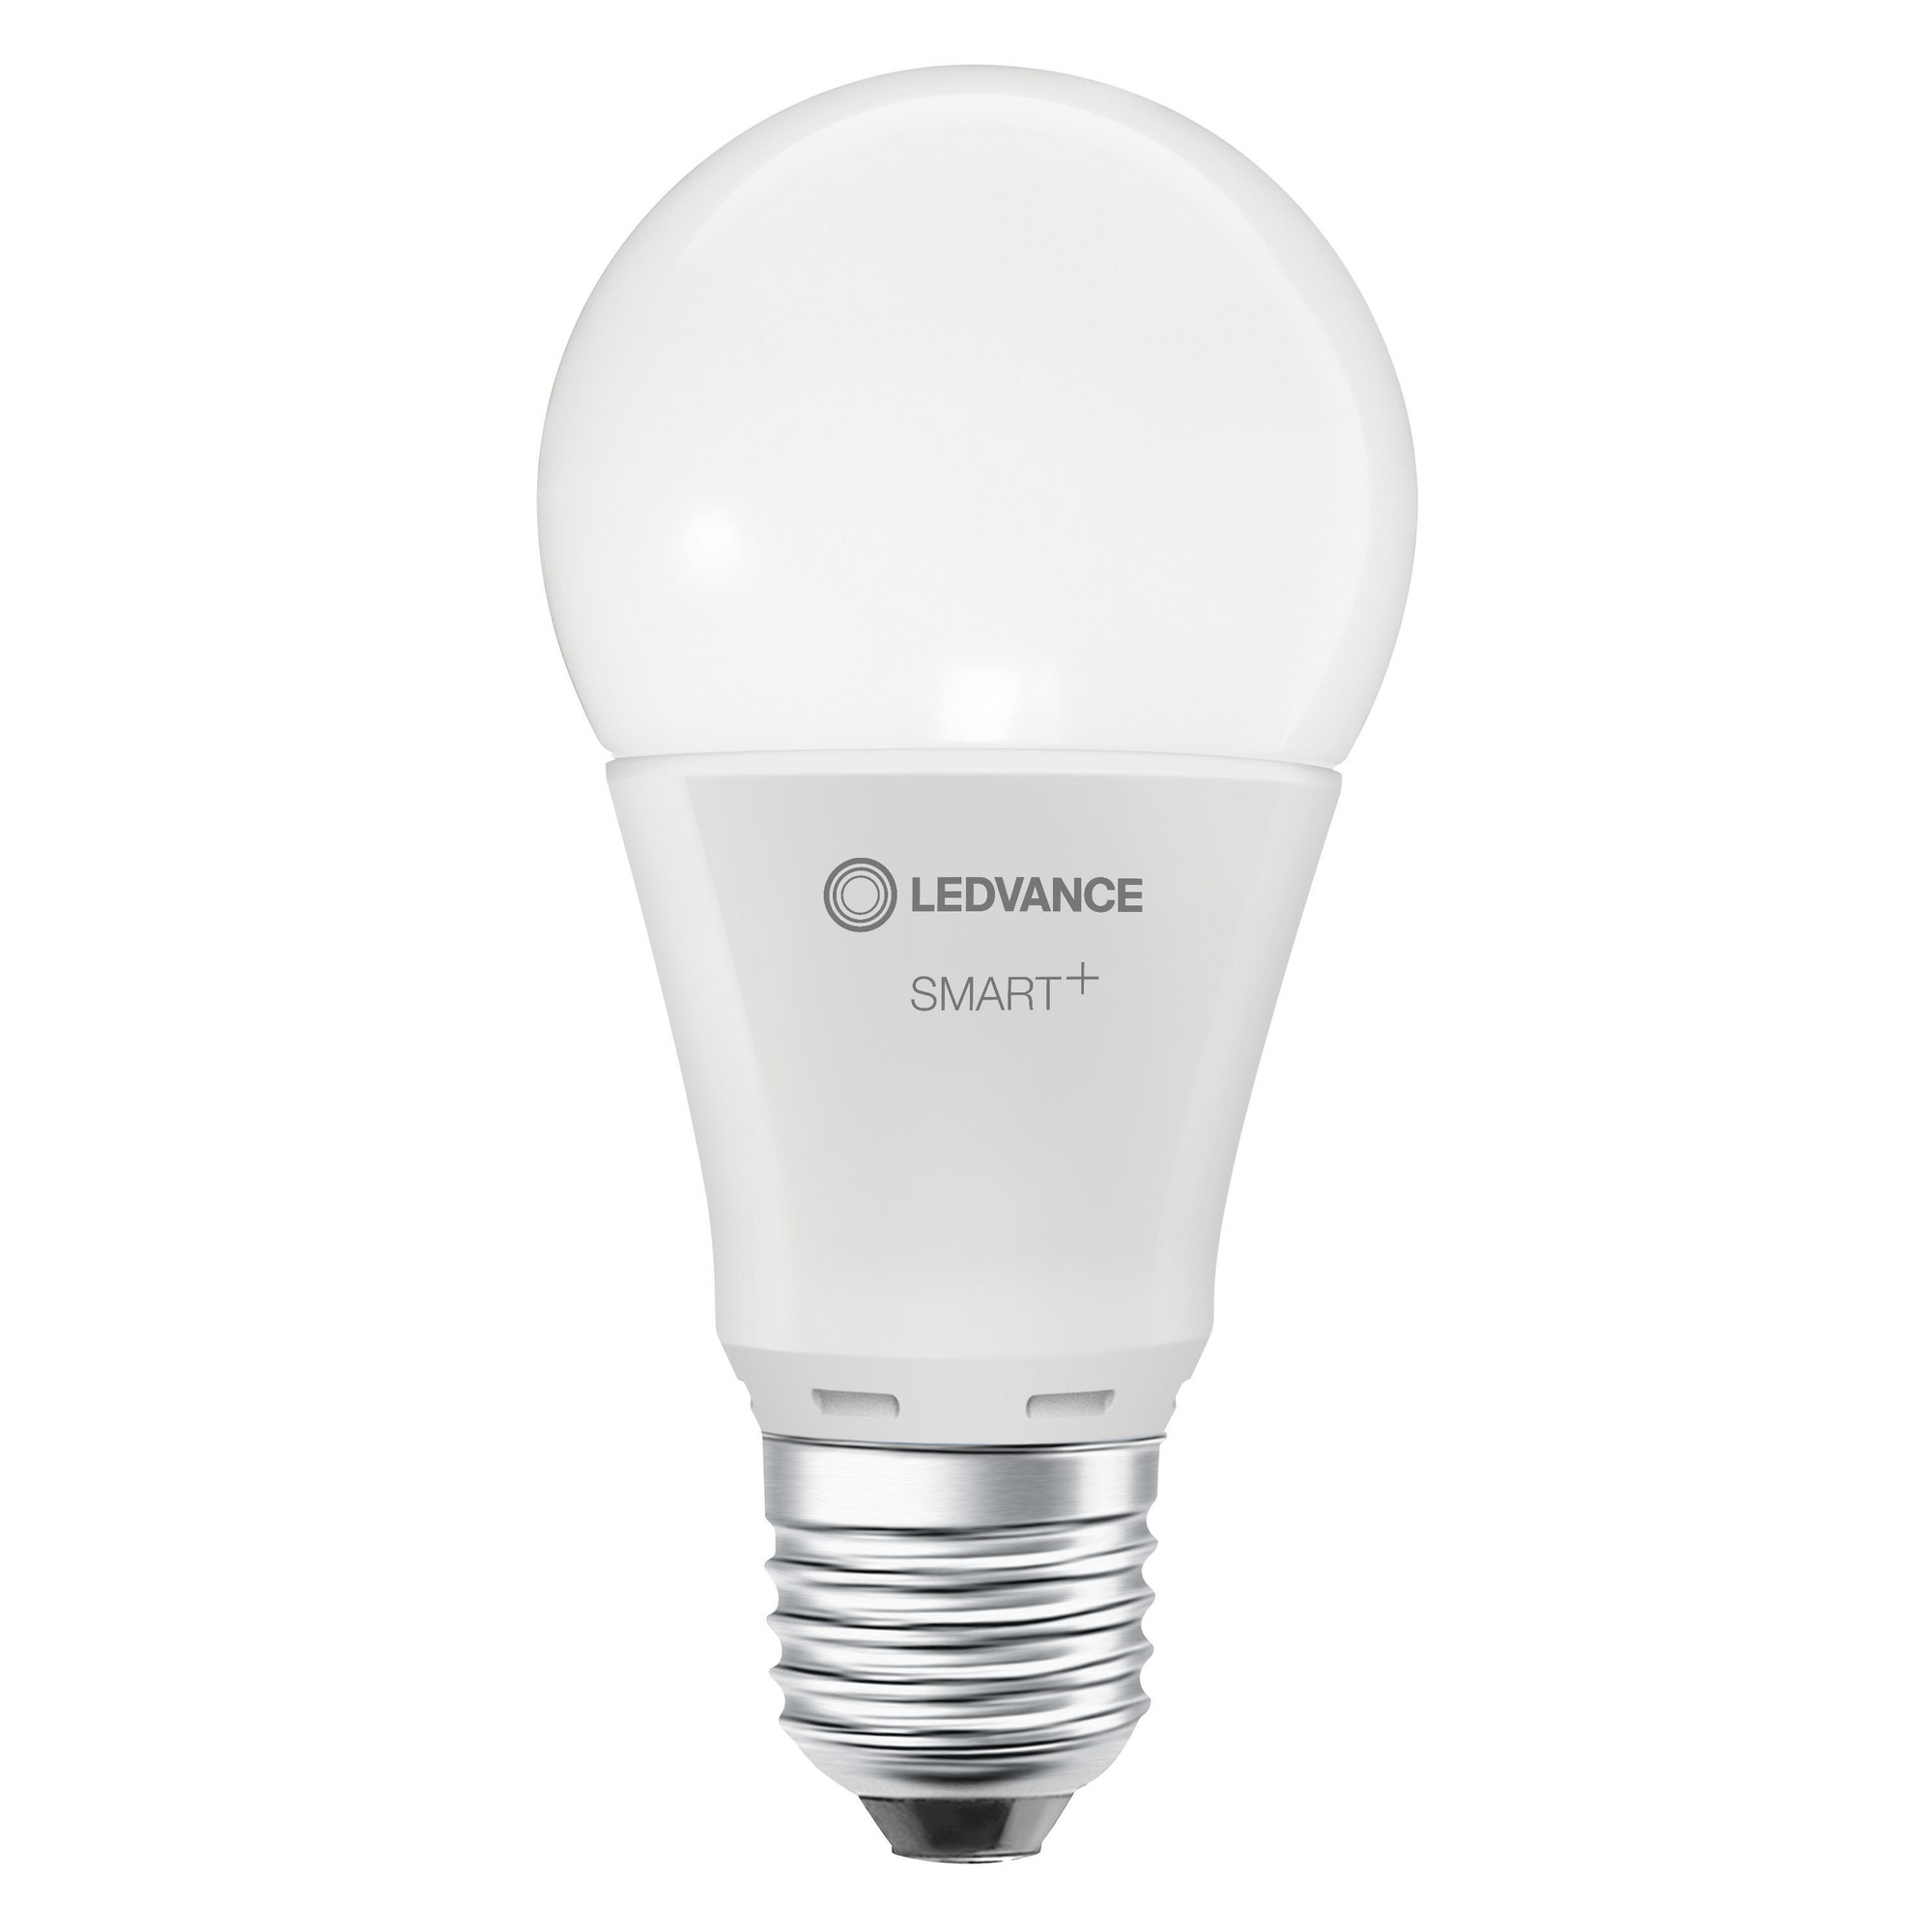 LED-Lampe 'Smart+' 10,7 cm 1521 lm 14 W E27 weiß WLAN Tunable White + product picture